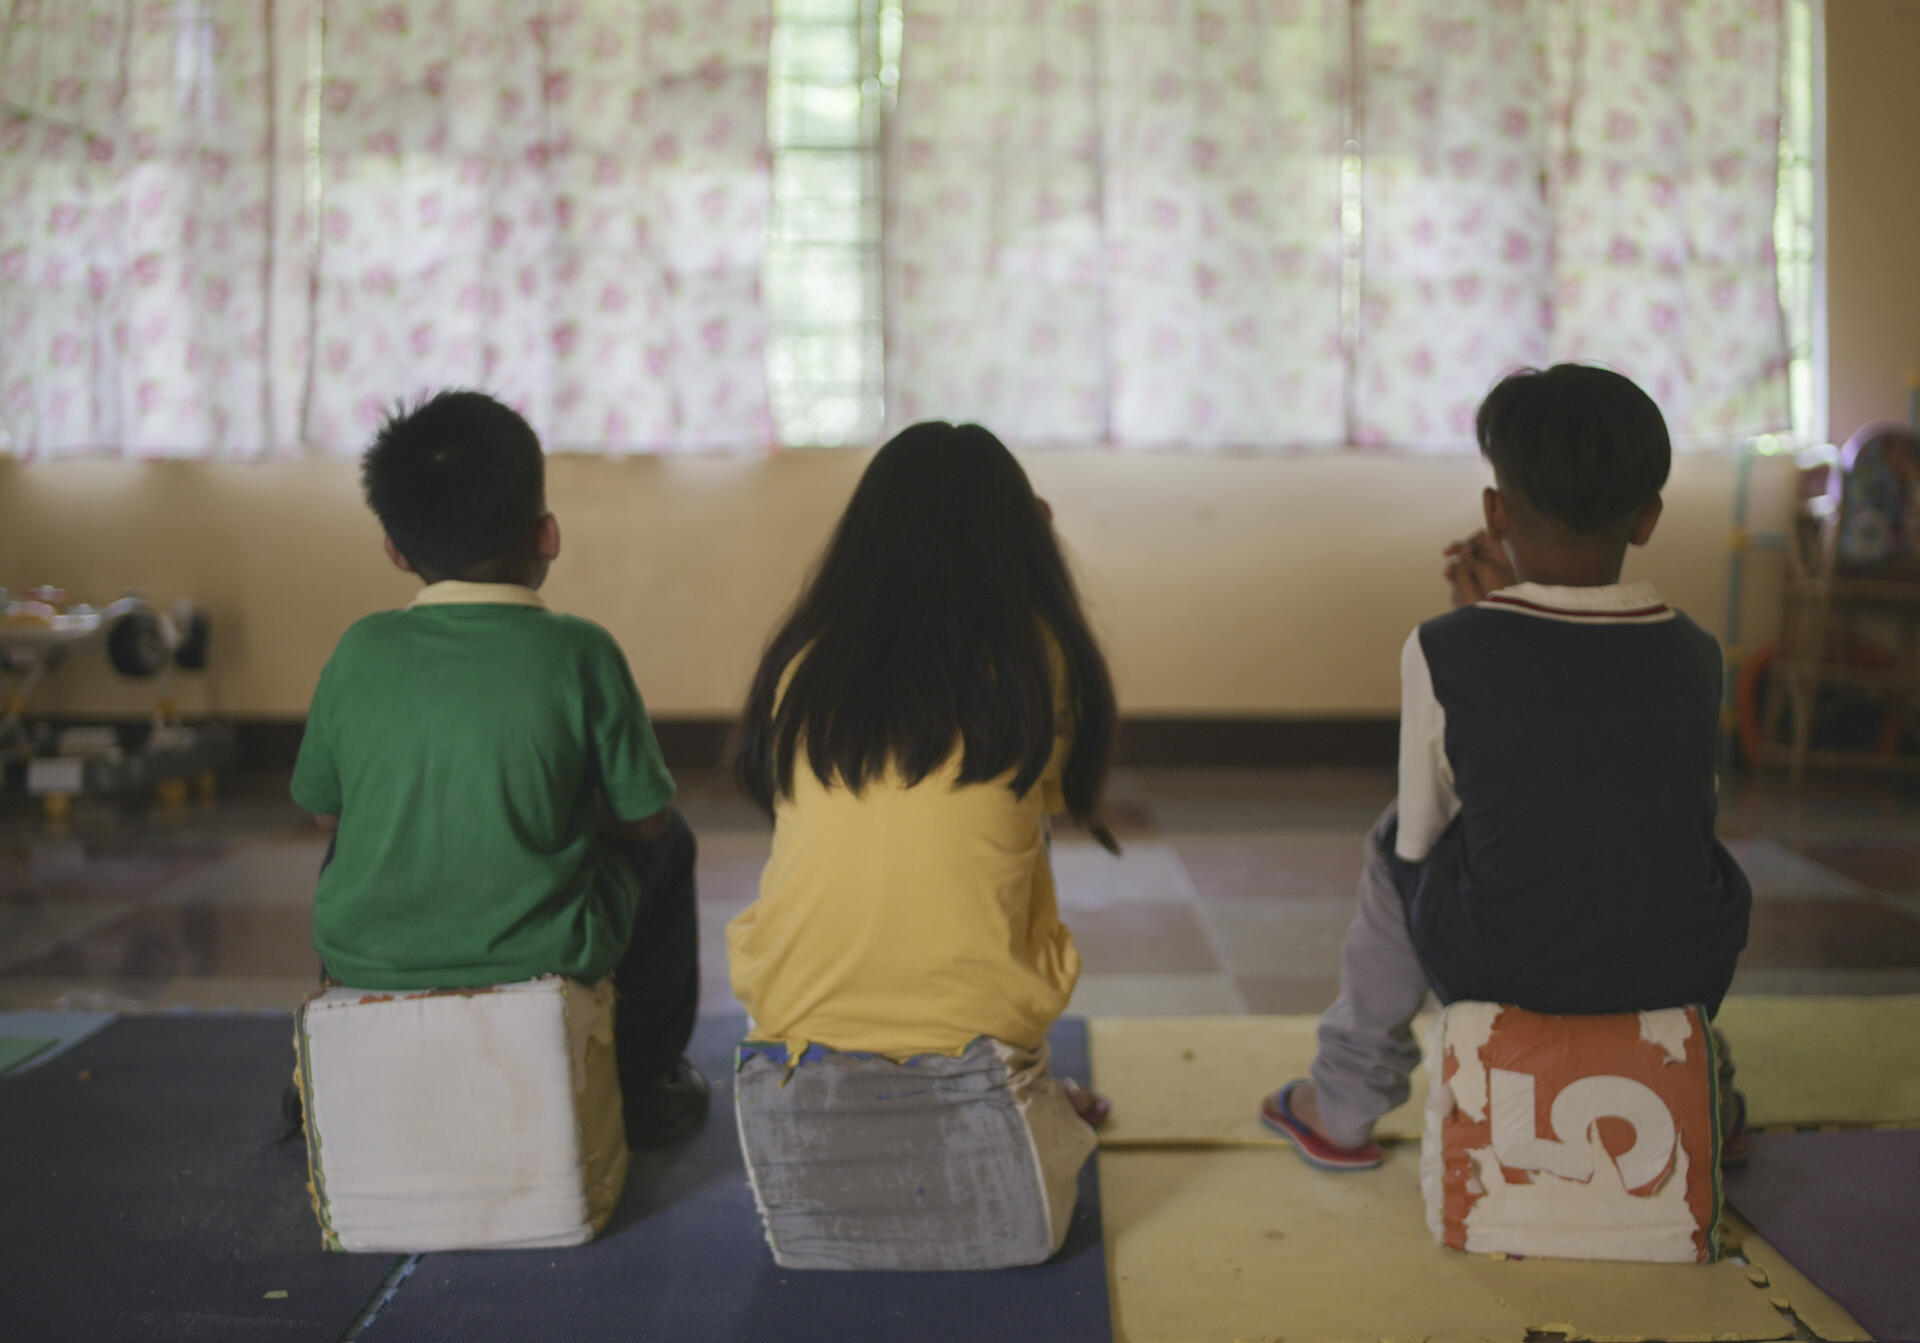 Diwa, in the center, surrounded by her little cousin (on the left) and her adoptive brother (on the right).  They testify to the rapes suffered, in the game room of the Preda foundation which collected them, in the region of Olongapo, in the Philippines, on December 10, 2022.